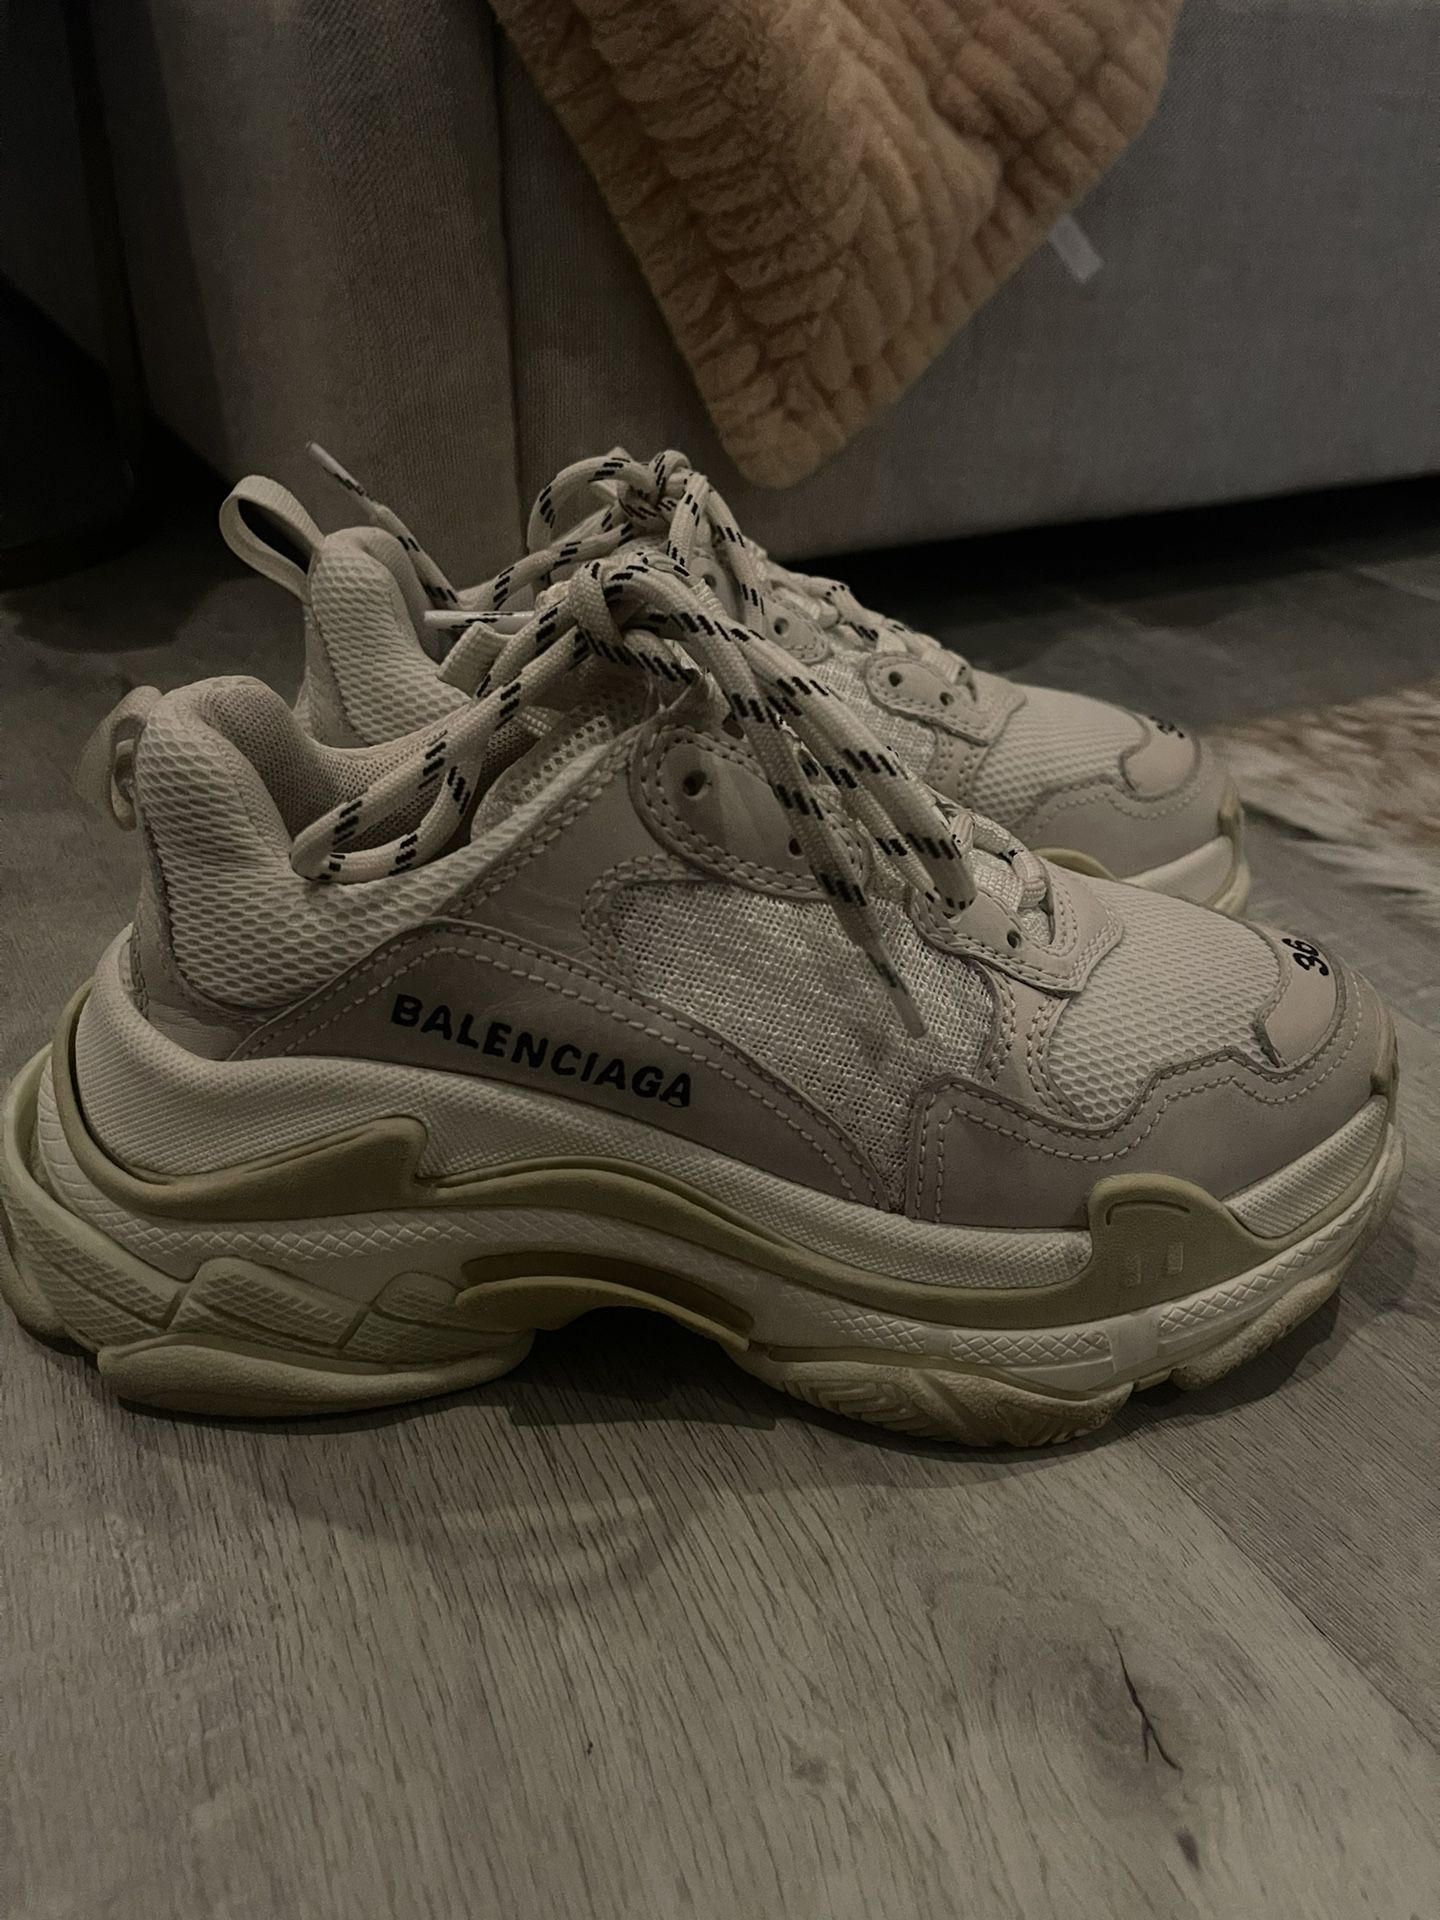 Lager audition lærling Balenciaga Sneakers Size 6 But Fits Size 7 for Sale in Warwick, PA - OfferUp